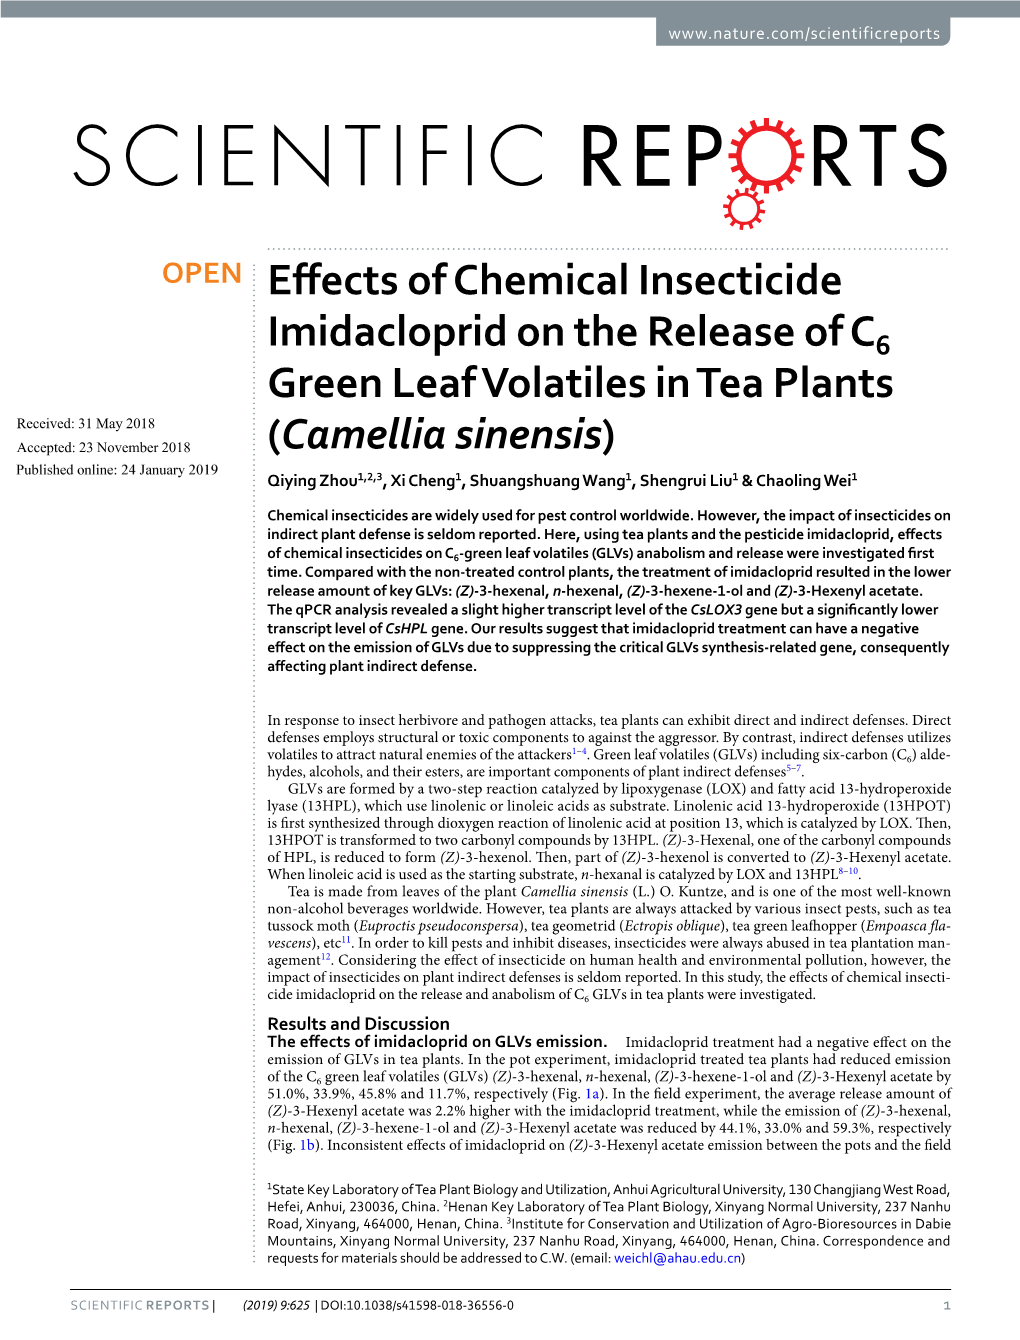 Effects of Chemical Insecticide Imidacloprid on the Release of C6